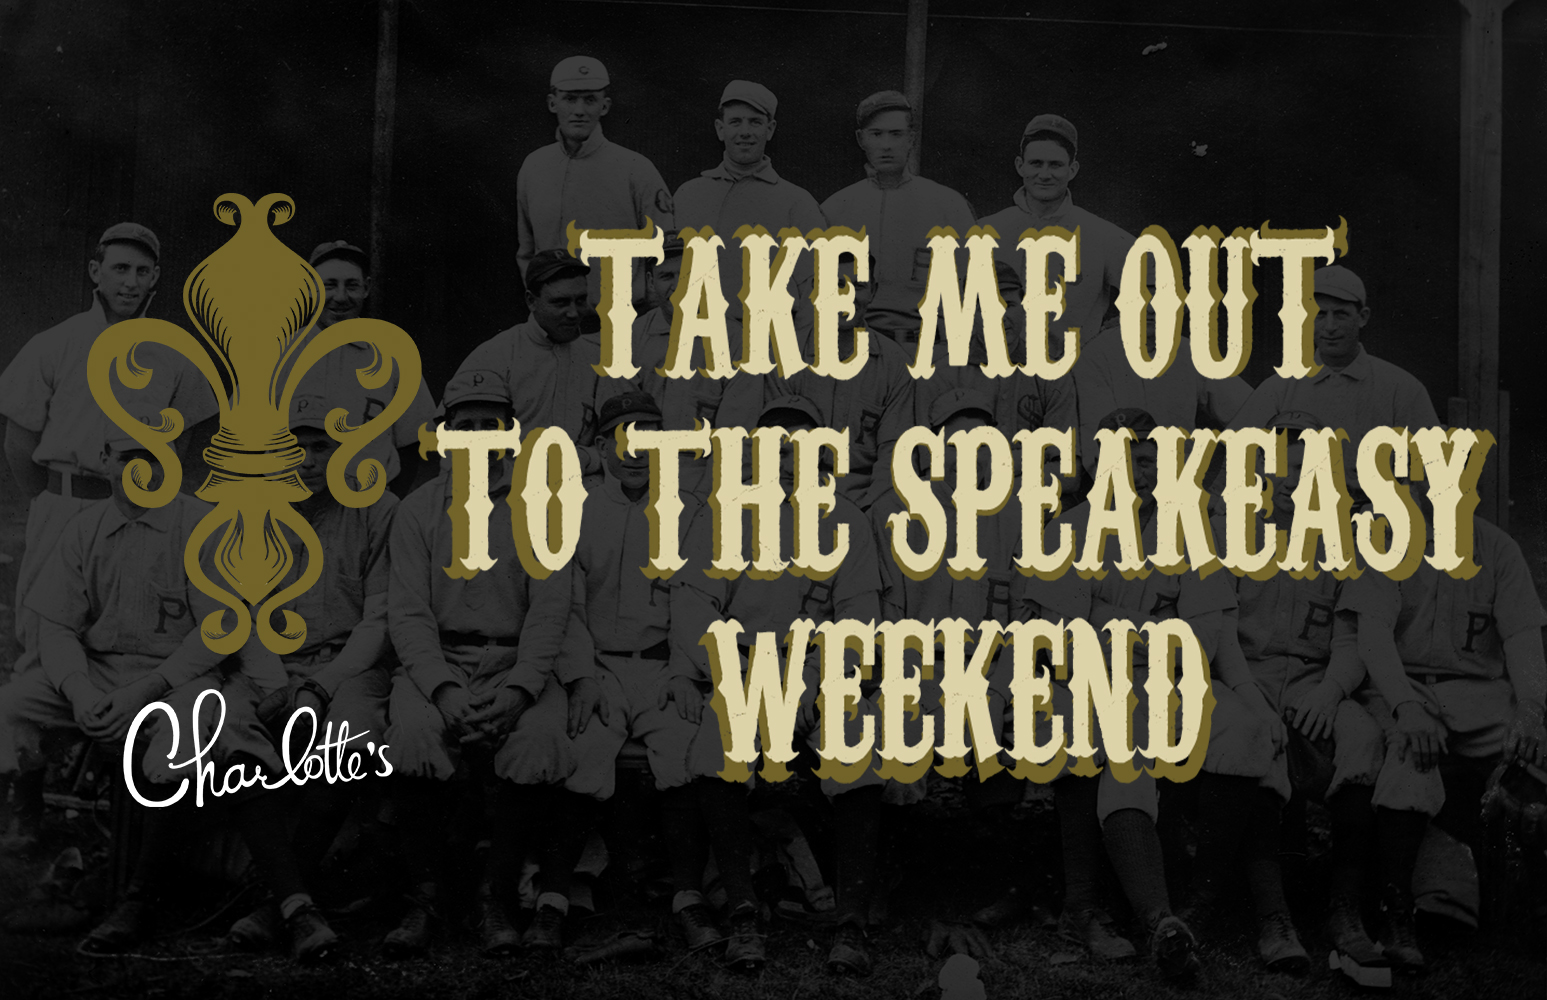 Take Me Out to the Speakeasy Weekend